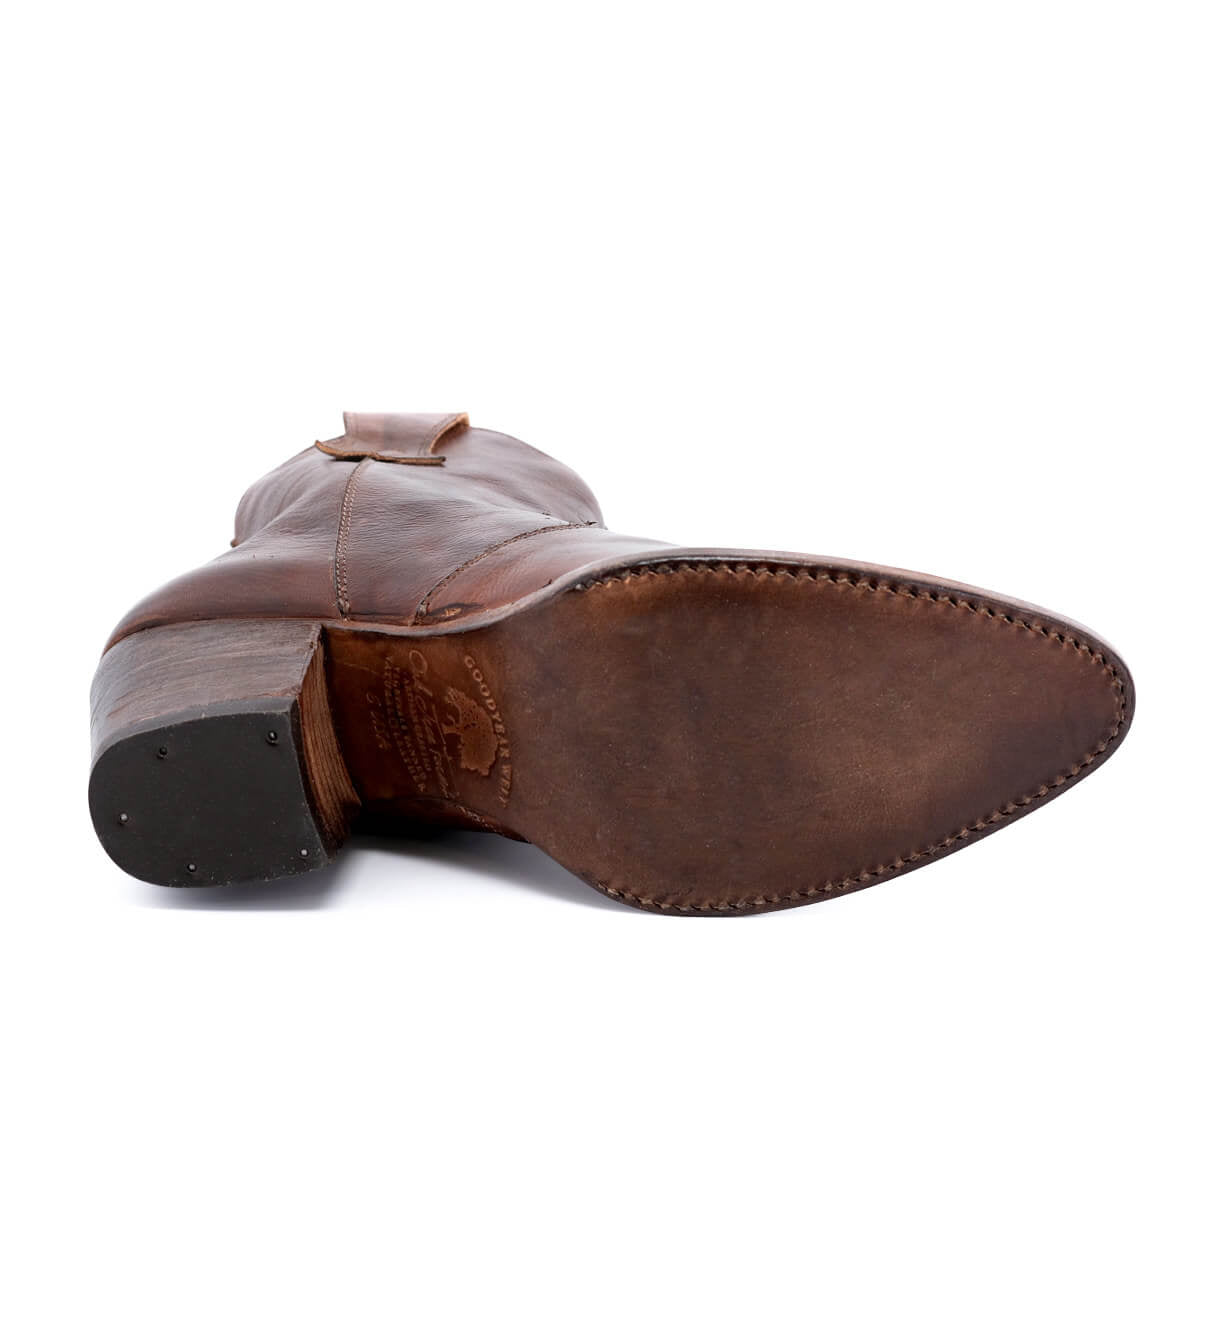 The side view of an Oak Tree Farms brown leather Baila boot.